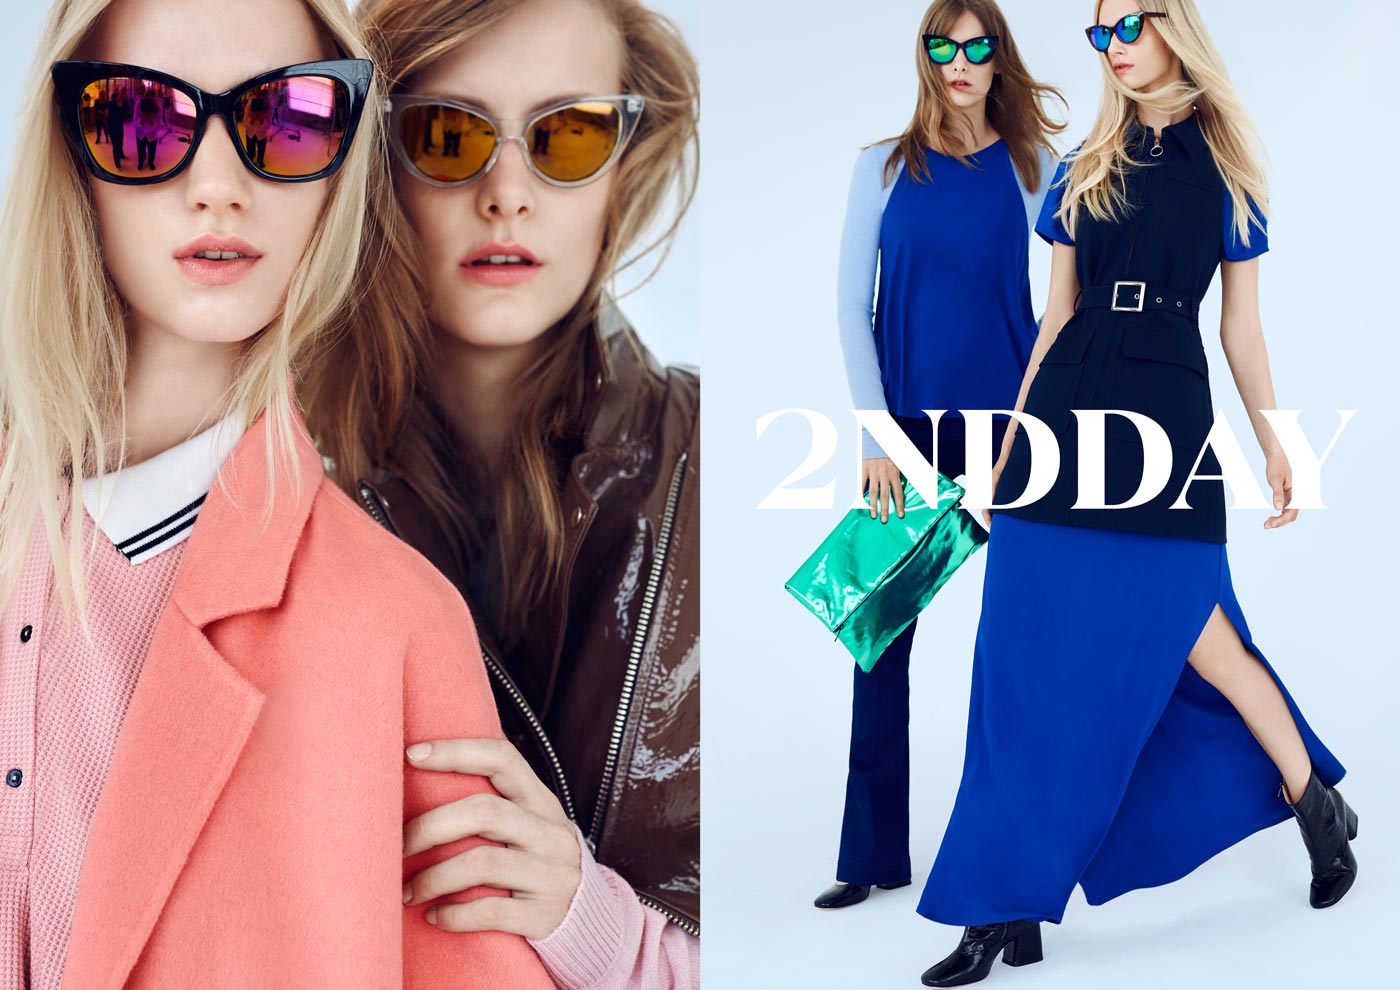 2ndday – Campaign Spring/Summer 2016